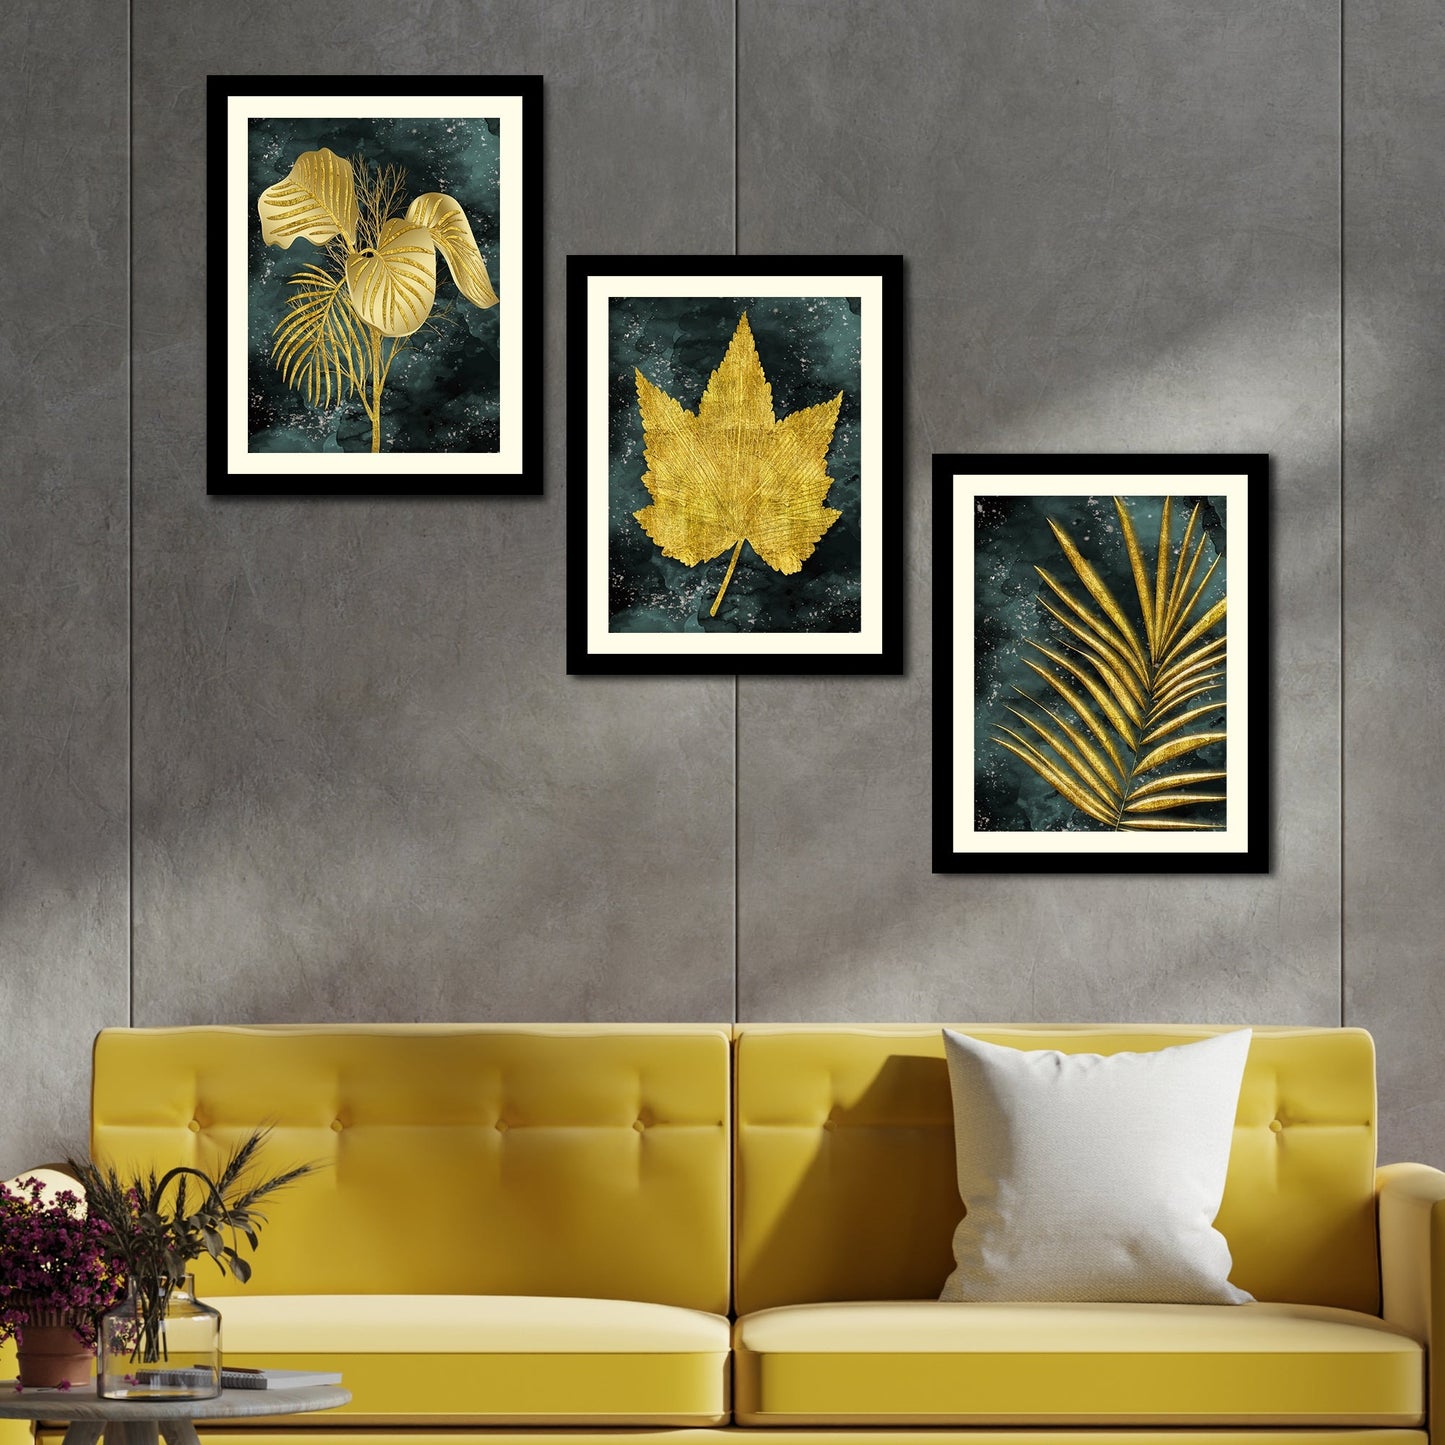 Golden Leaves Decorative Wall Frame Set of Three